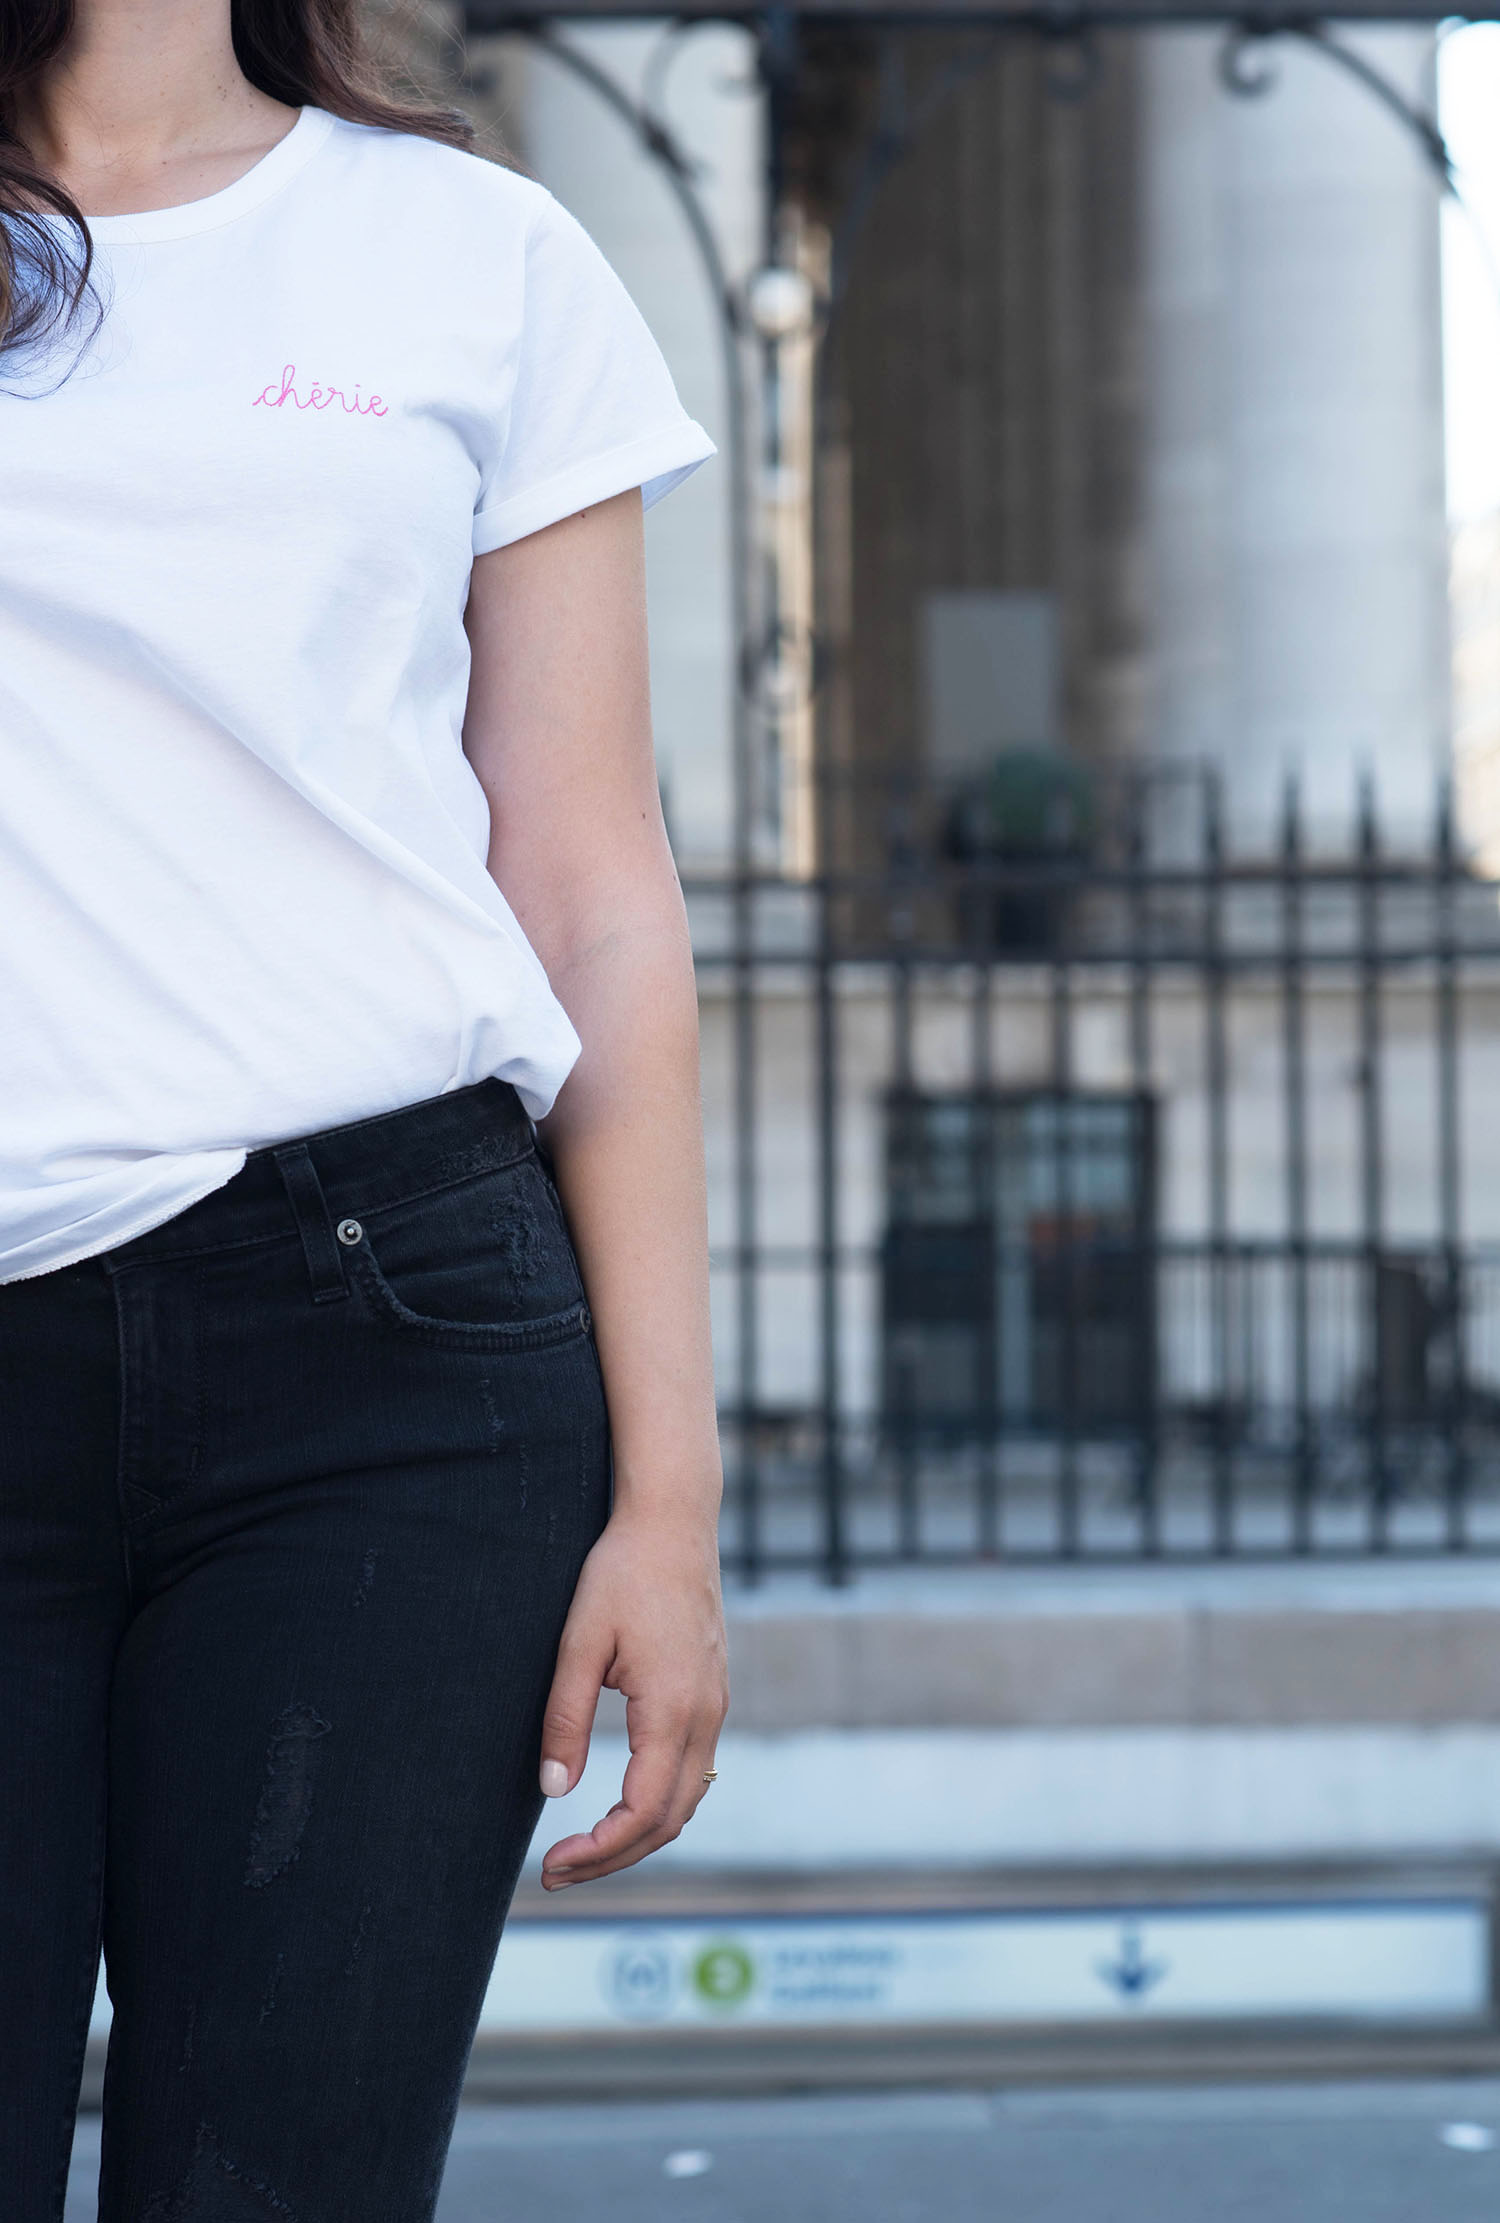 Outfit details on fashion blogger Cee Fardoe of Coco & Vera, wearing a Maison Labiche Cherie tee and Lovers + Friends jeans